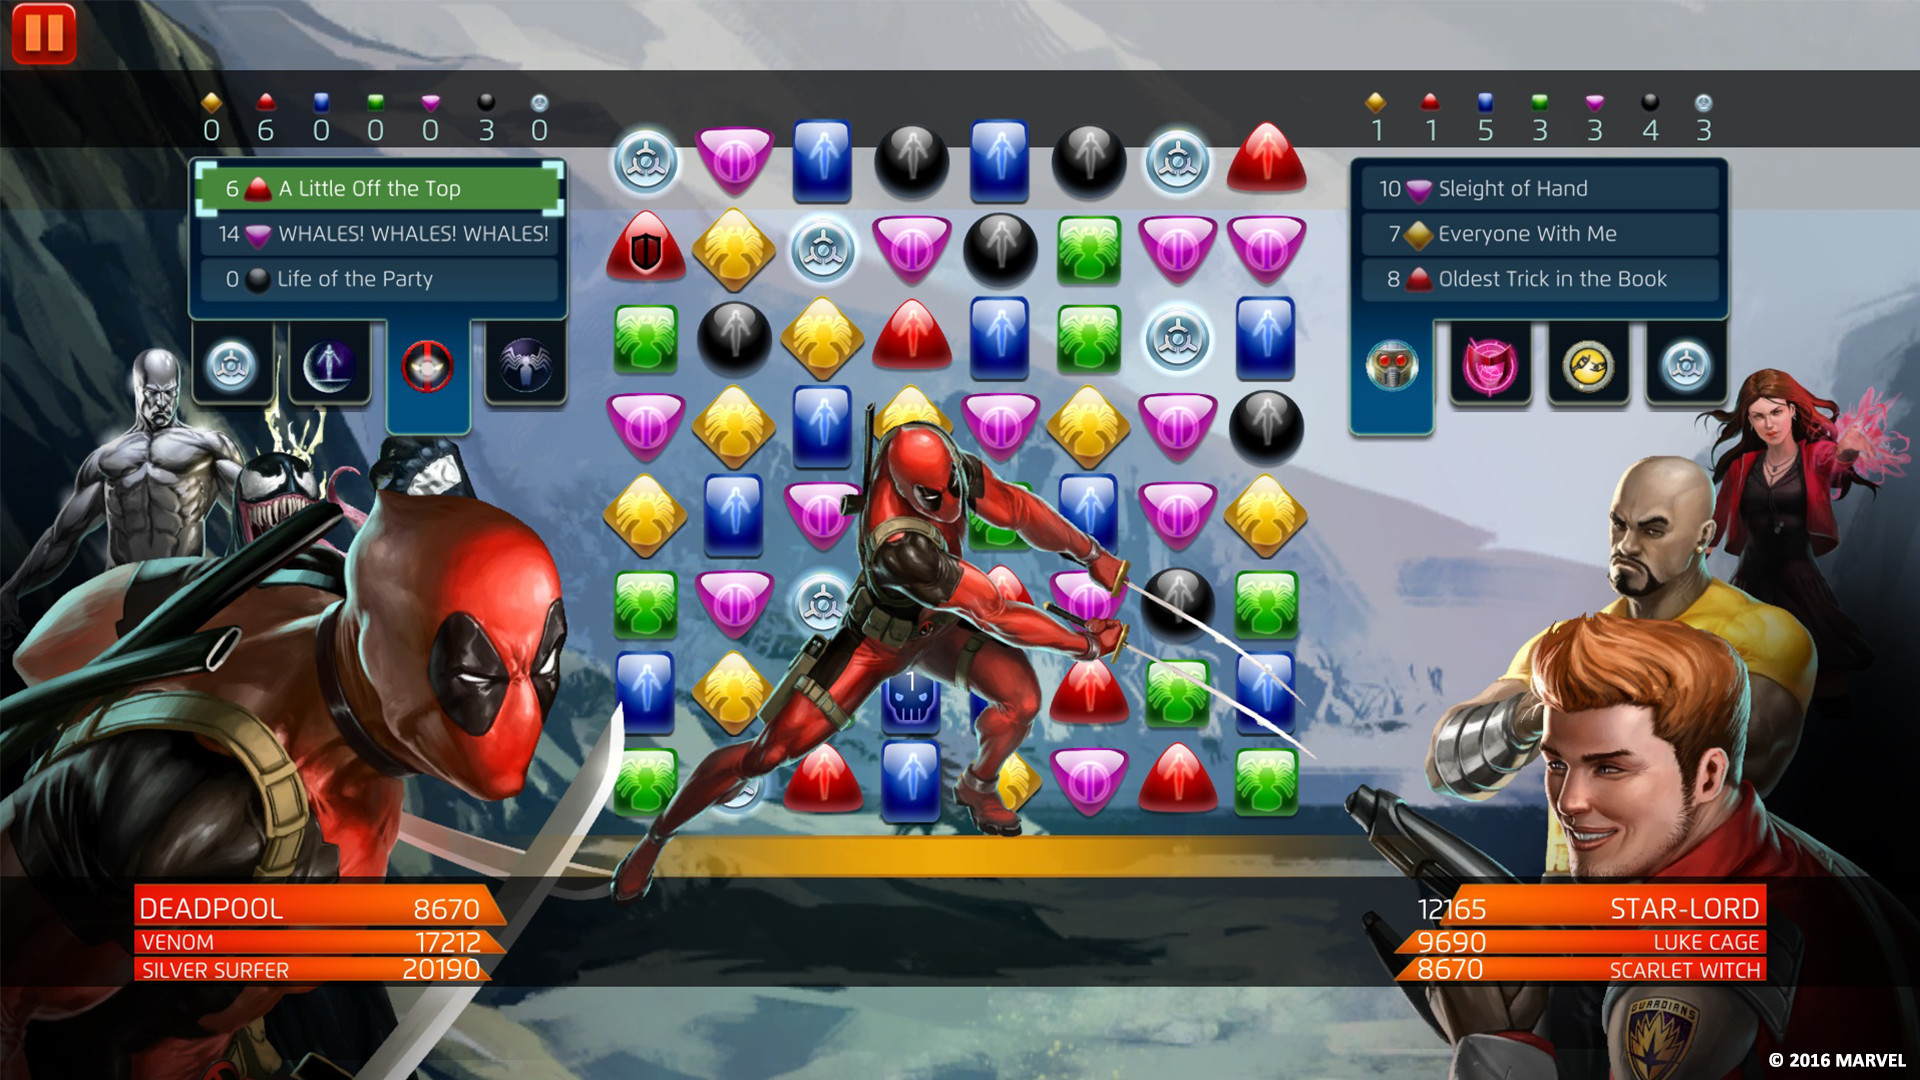 Marvel Puzzle Quest - S.H.I.E.L.D. New Recruit Pack Featured Screenshot #1